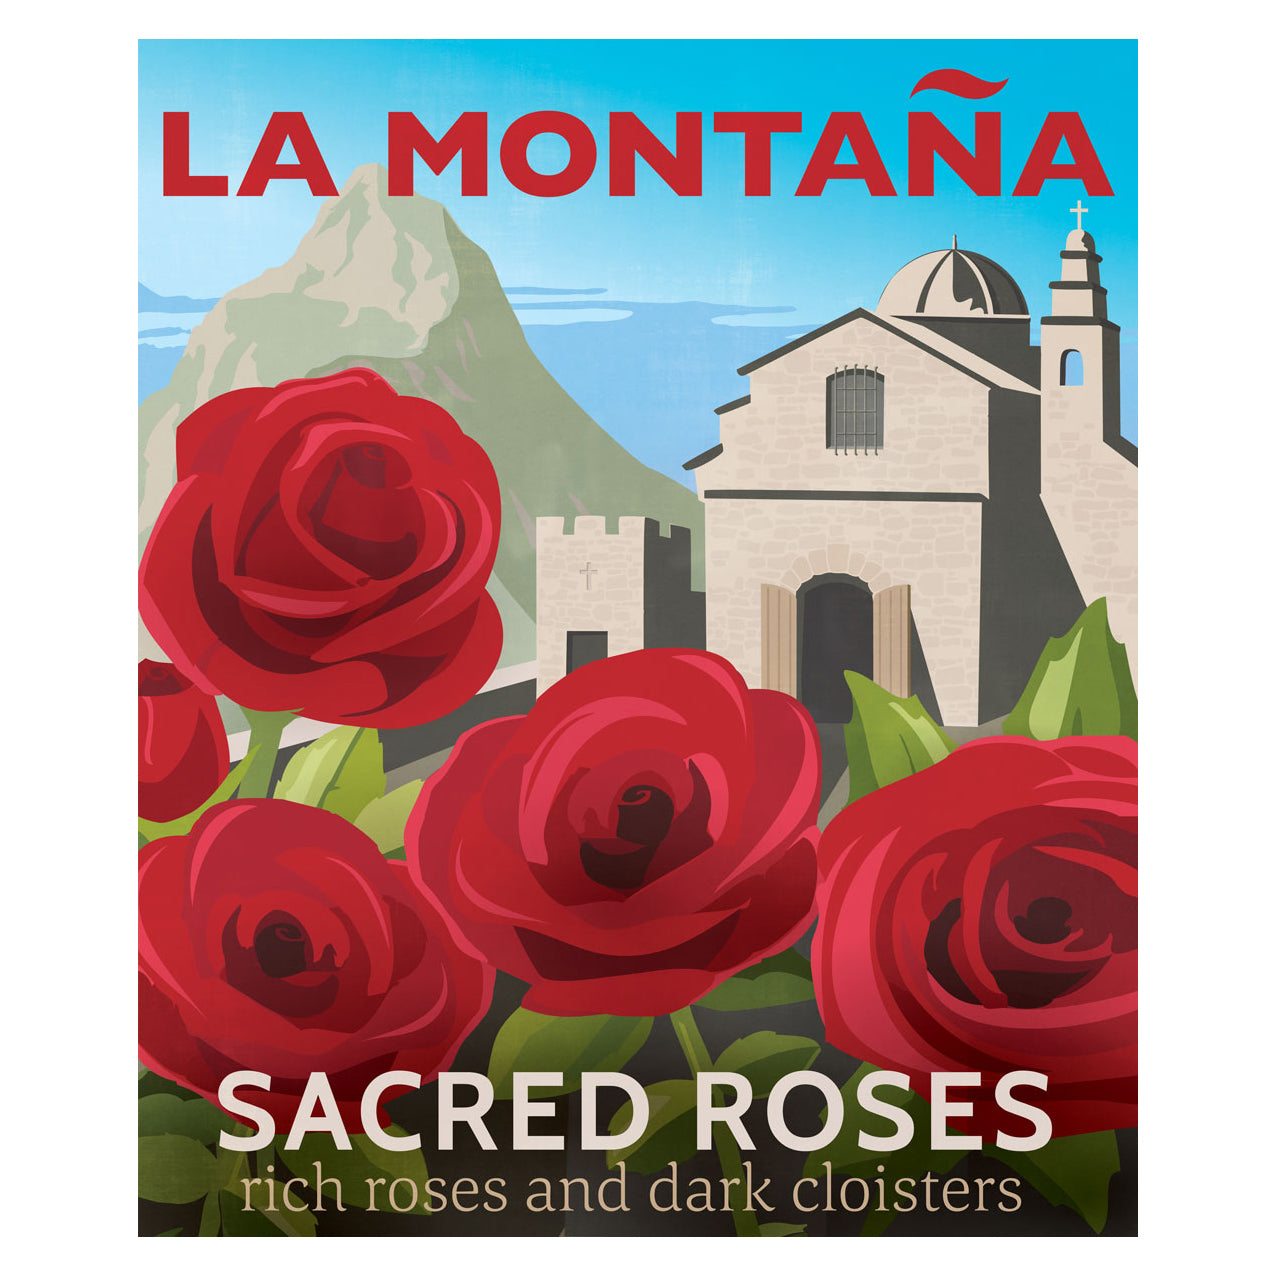 La Montaña Sacred Roses Scented Candle - Osmology Scented Candles & Home Fragrance